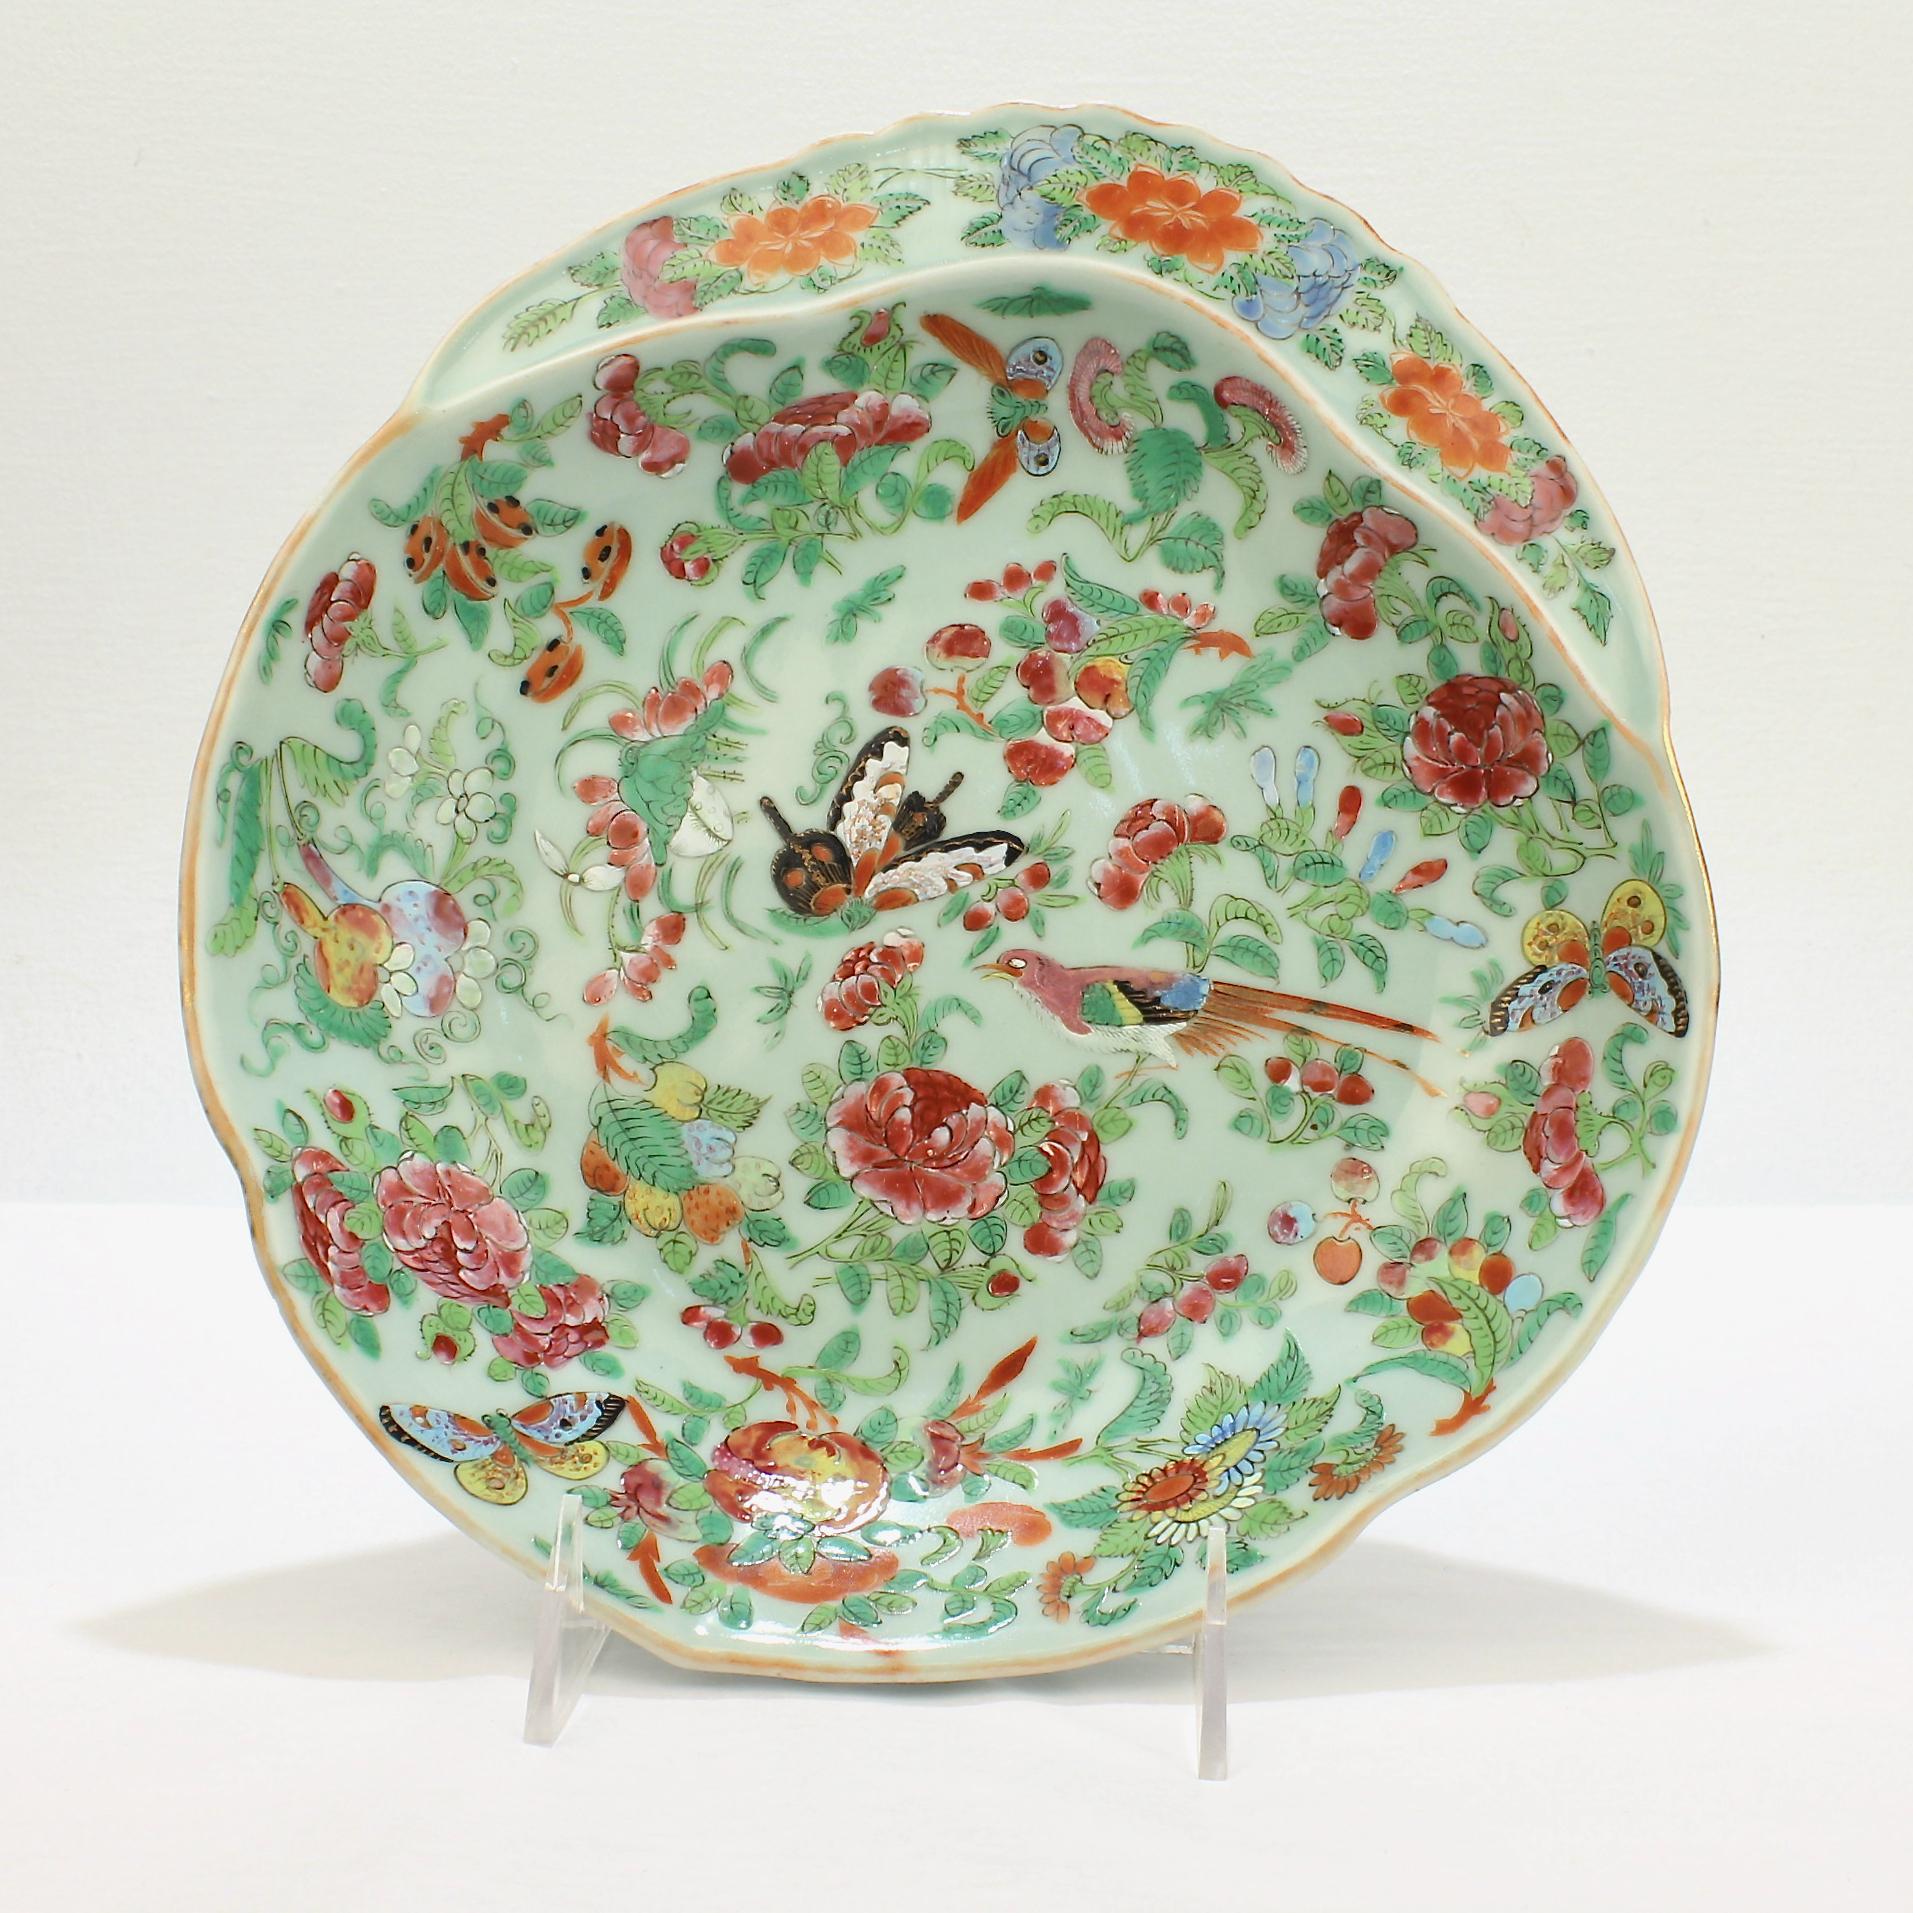 A very fine Chinese porcelain shrimp bowl.

With a celadon glaze and birds, butterflies, flowers, and foliage in painted enamel decoration throughout.

An excellent example!

Date:
Early 20th century or earlier

Overall condition:
It is in